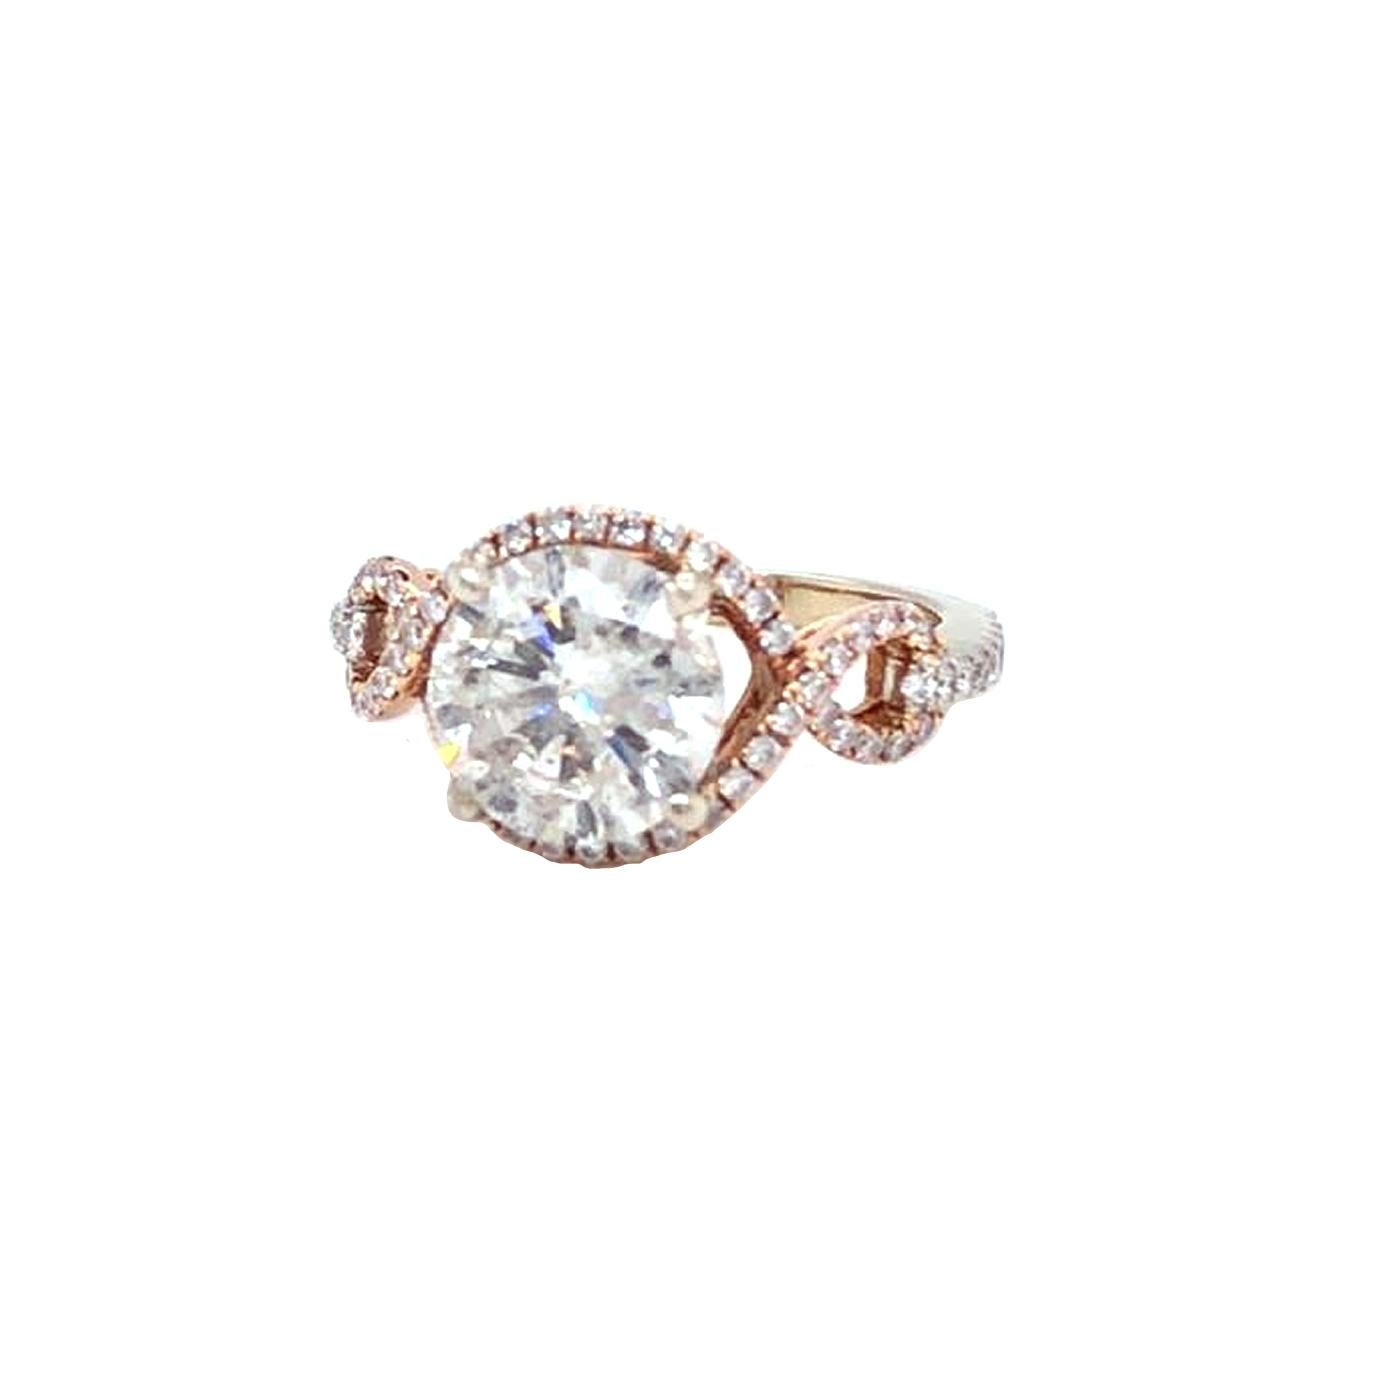 Finding the right engagement ring for your loved one can be a tough ask. If you want to make the right choice, this stunning 2.02 Ct Round Cut H/I1 Diamond Solitaire Engagement Ring is just the place to start. Encapsulated with stunning 18K white